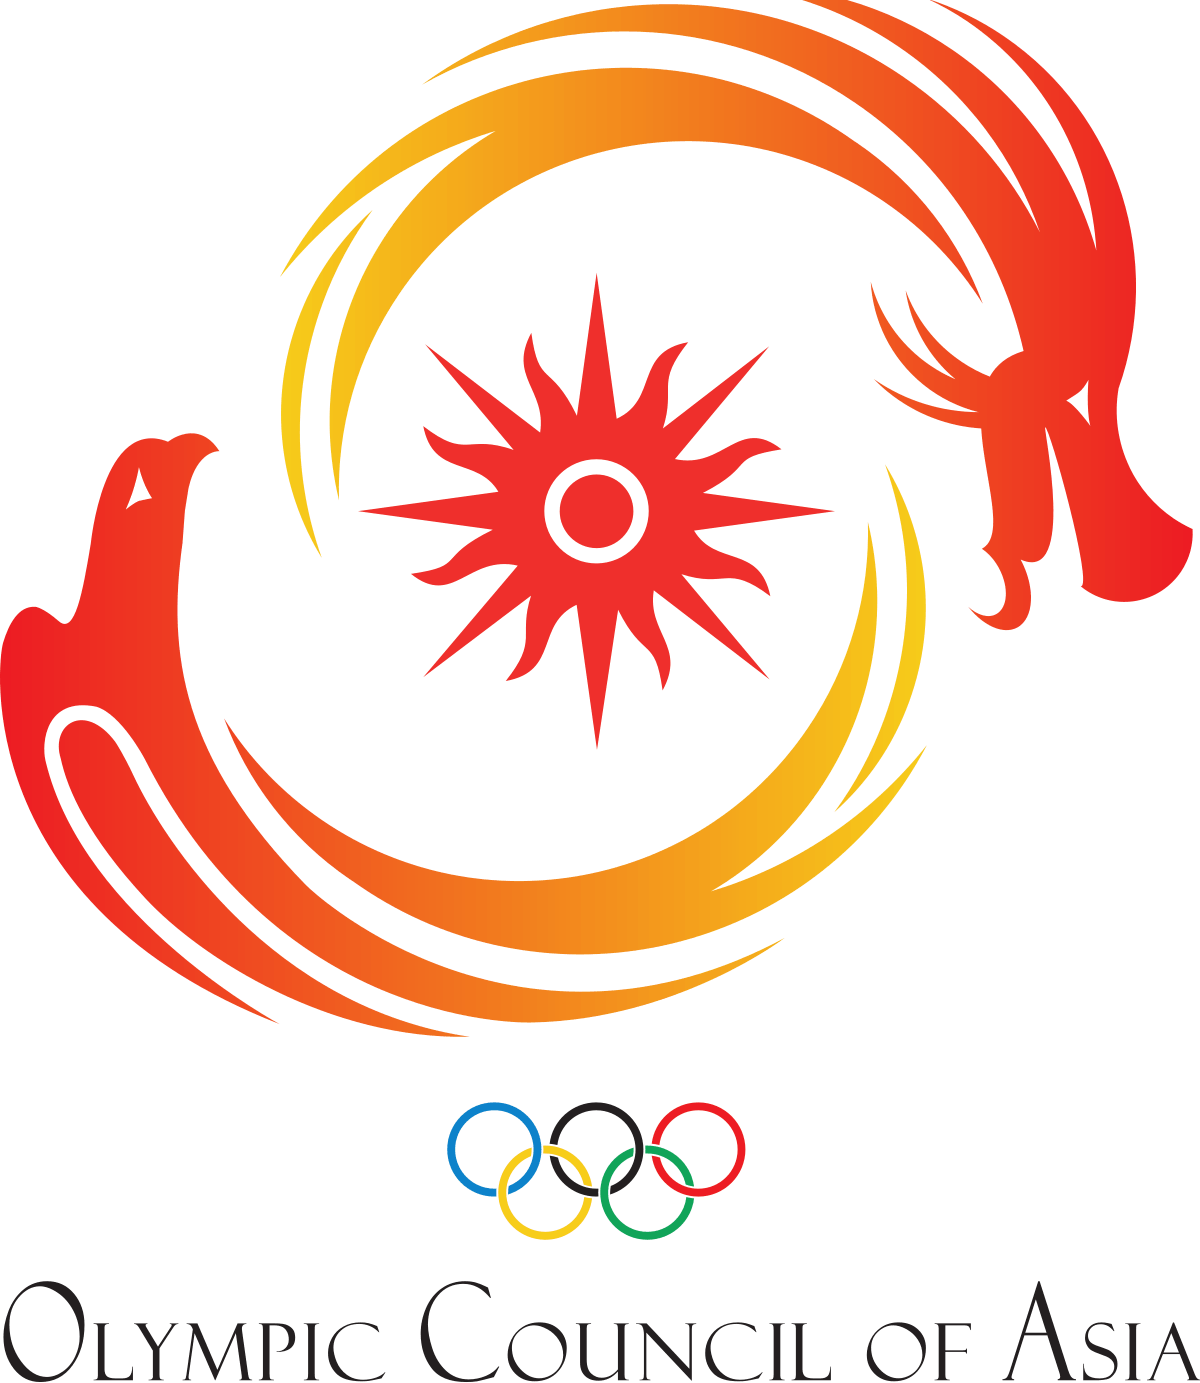 Asia People Logo - Olympic Council of Asia